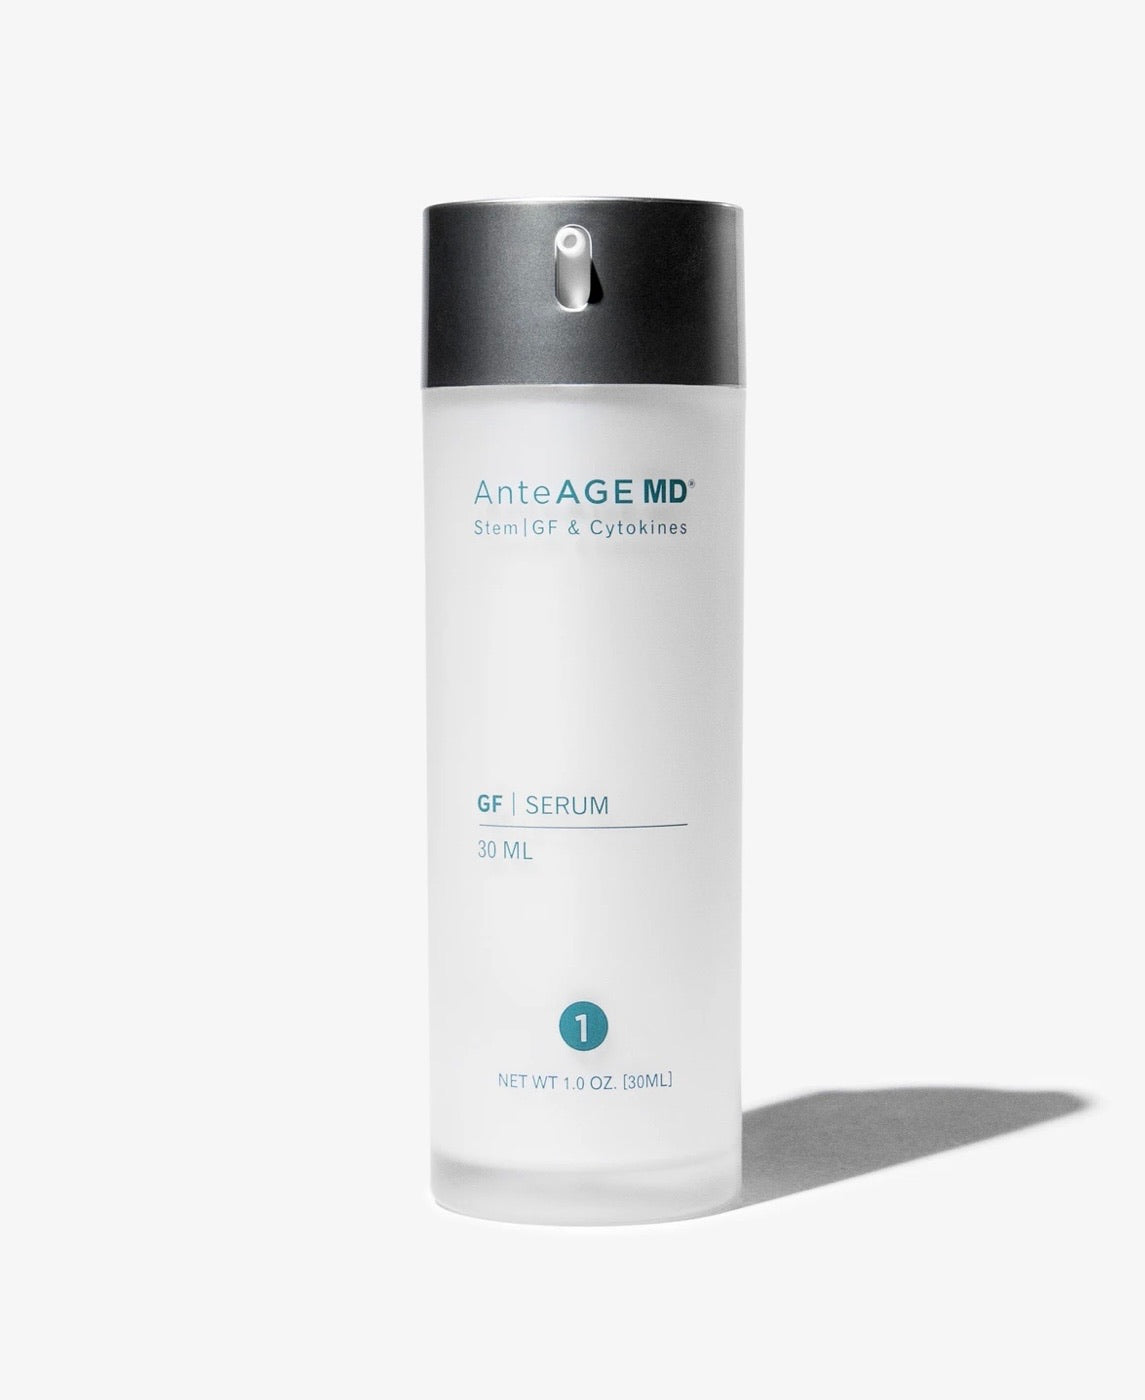 ANTEAGE Serum - A potent 30ml formula infused with stem cytokines and advanced anti-aging ingredients for rejuvenating and nourishing the skin.